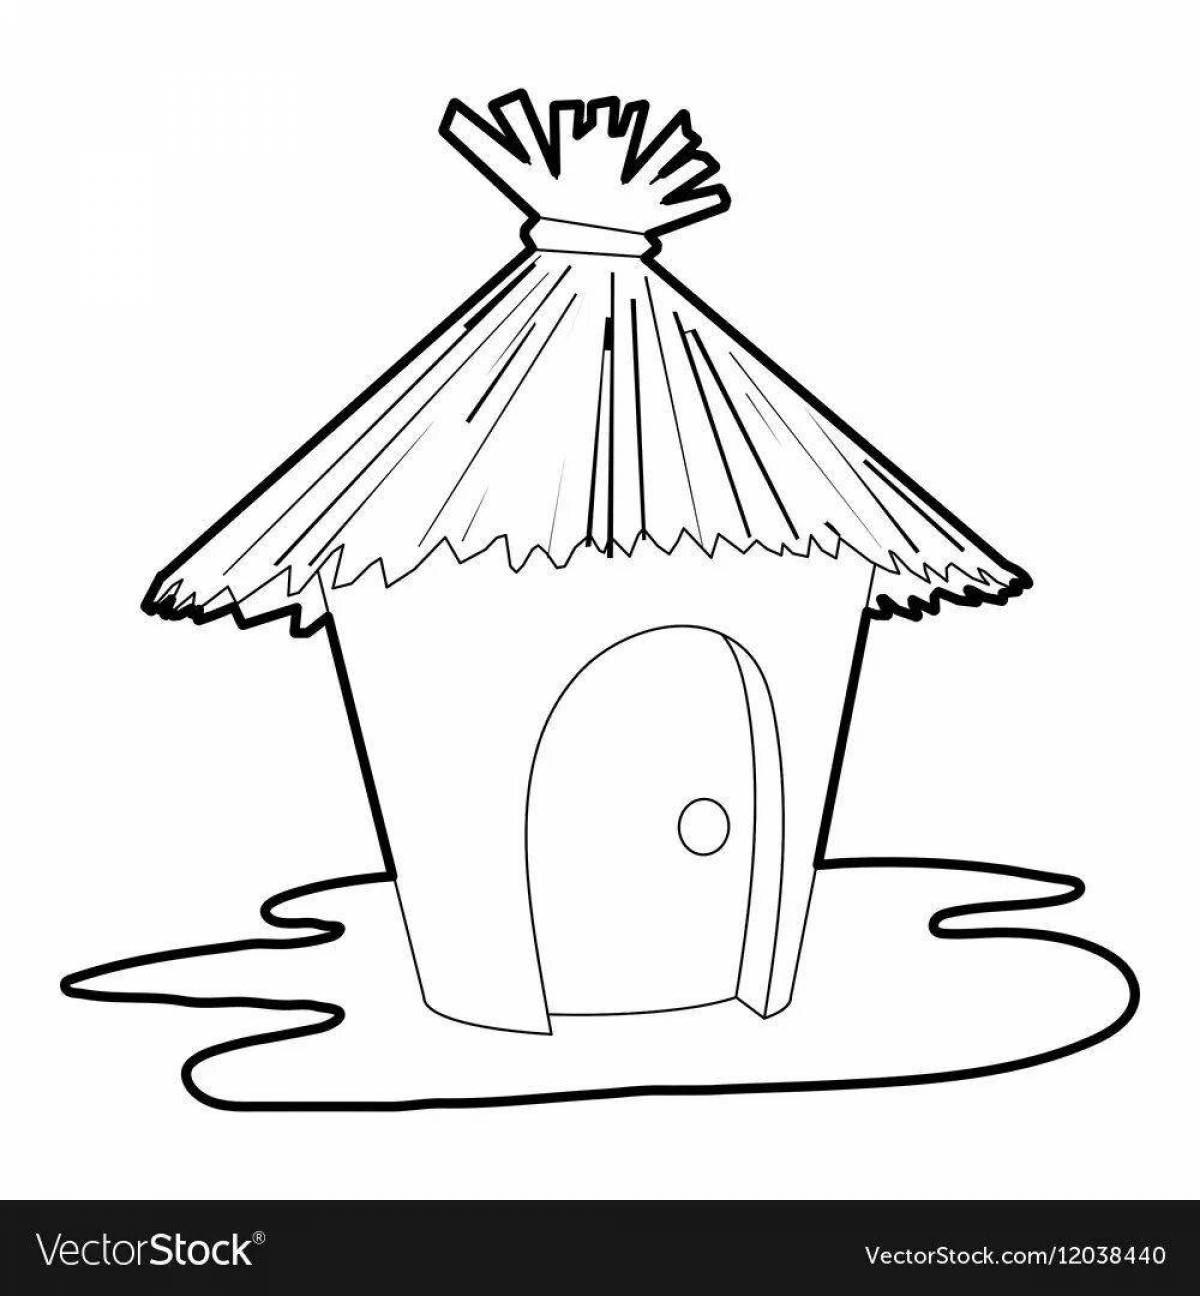 Coloring page fascinating hut